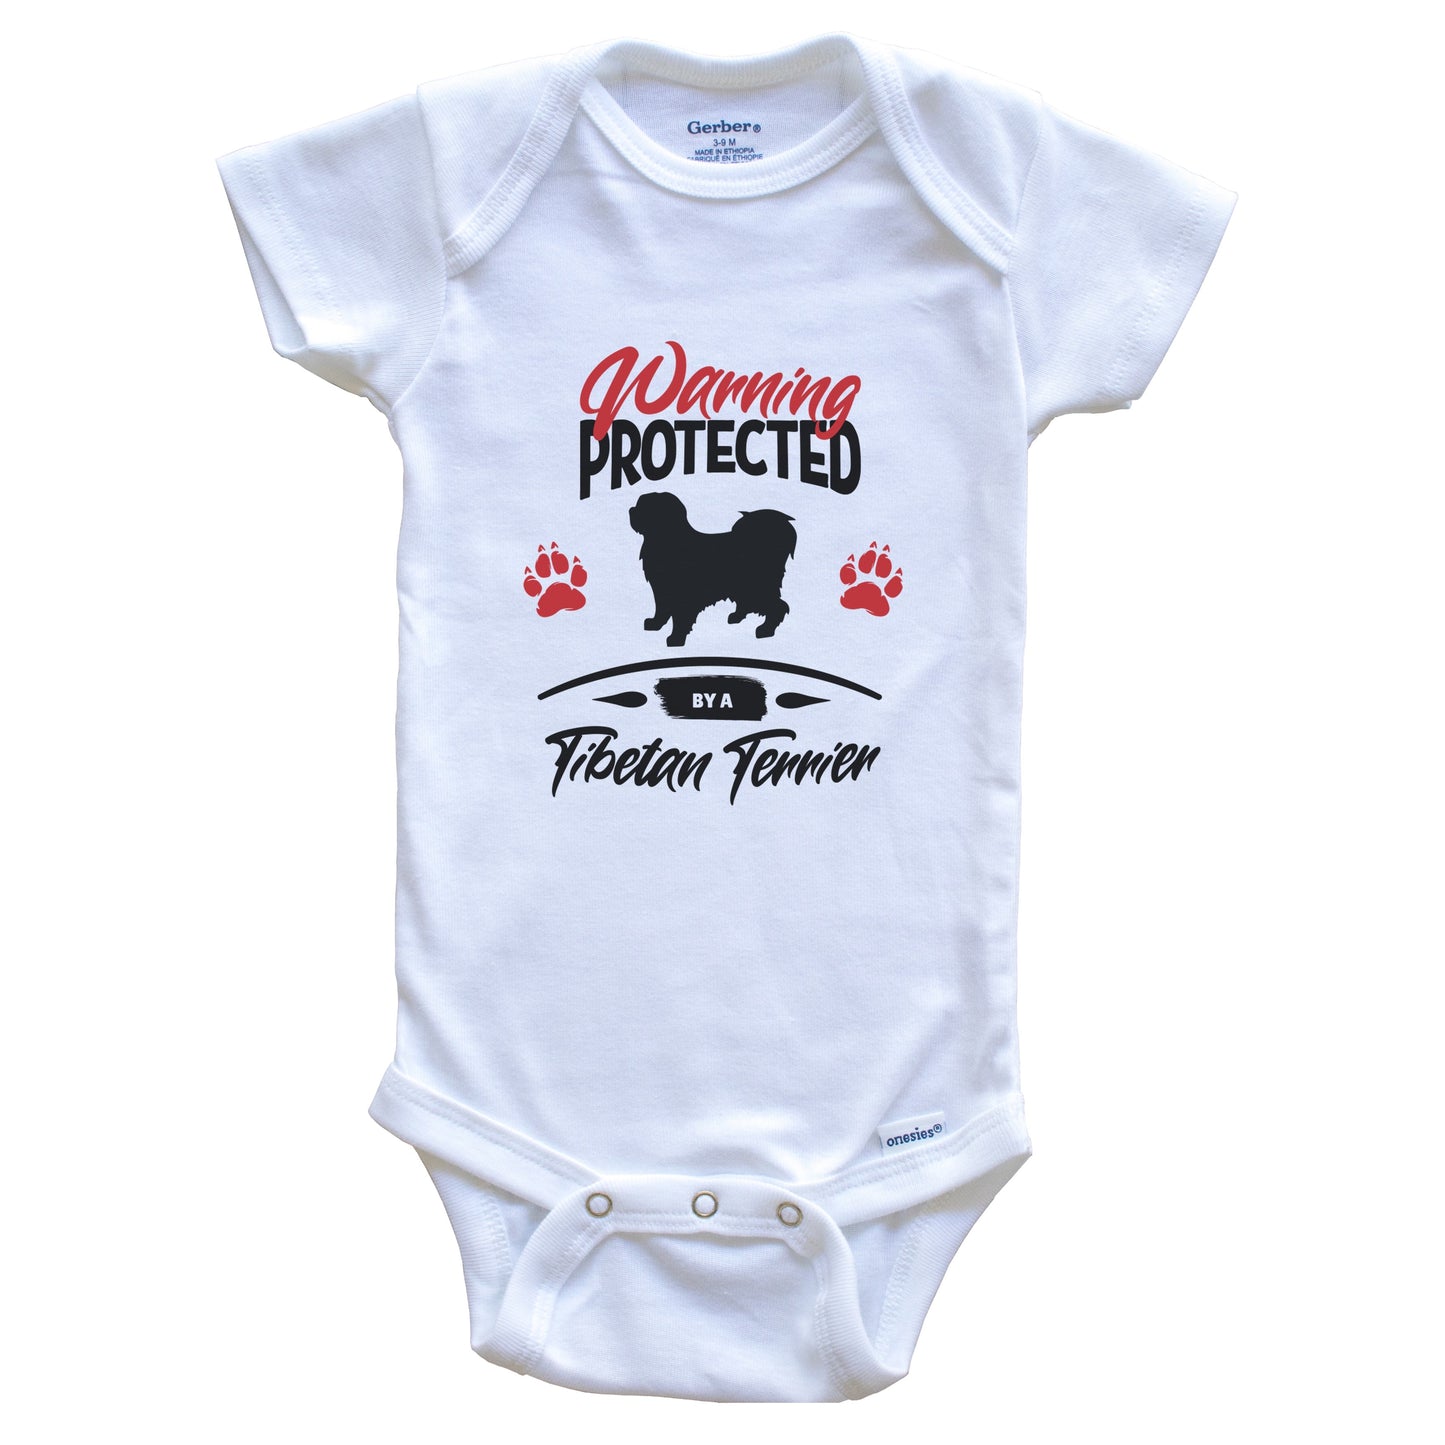 Warning Protected By A Tibetan Terrier Funny Dog Owner Baby Bodysuit